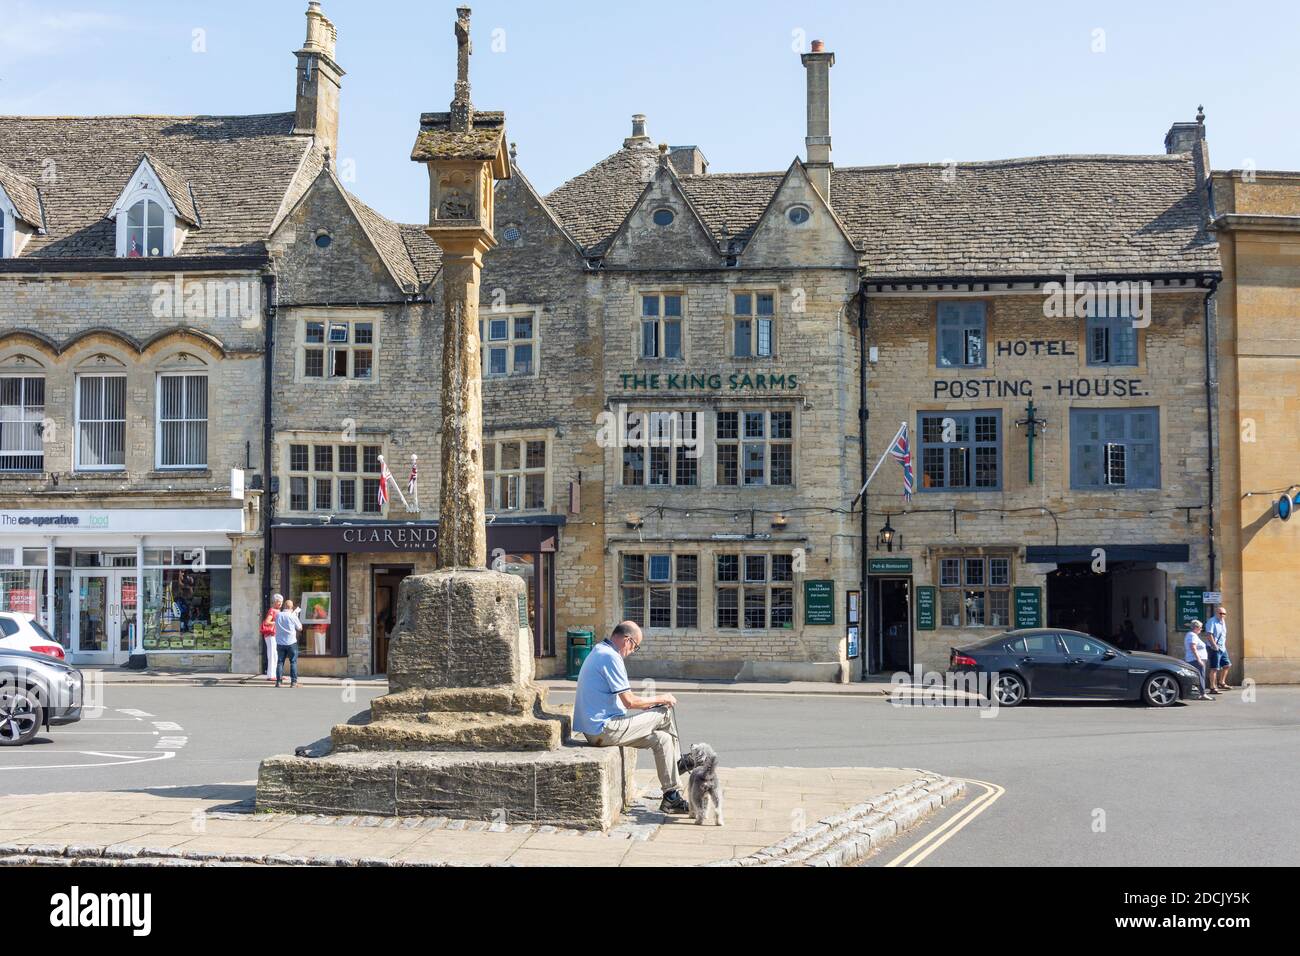 Ancient Market Cross, Market Square, Stow-on-the-Wold, Gloucestershire, England, United Kingdom Stock Photo